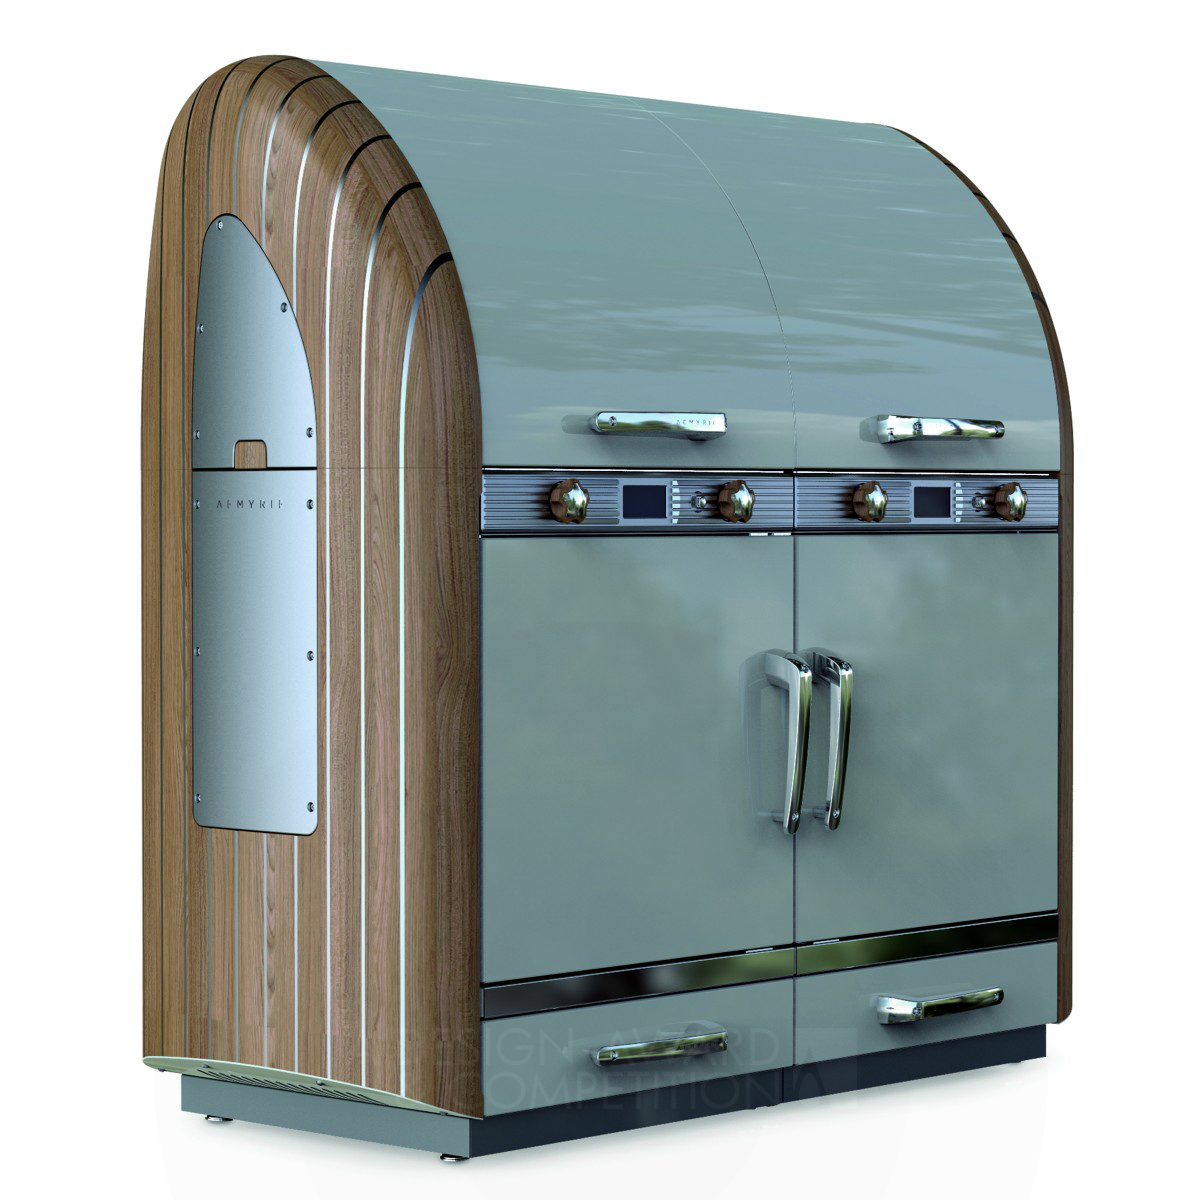 Aemyrie Igneum Wood Fired Oven by Aemyrie Limited